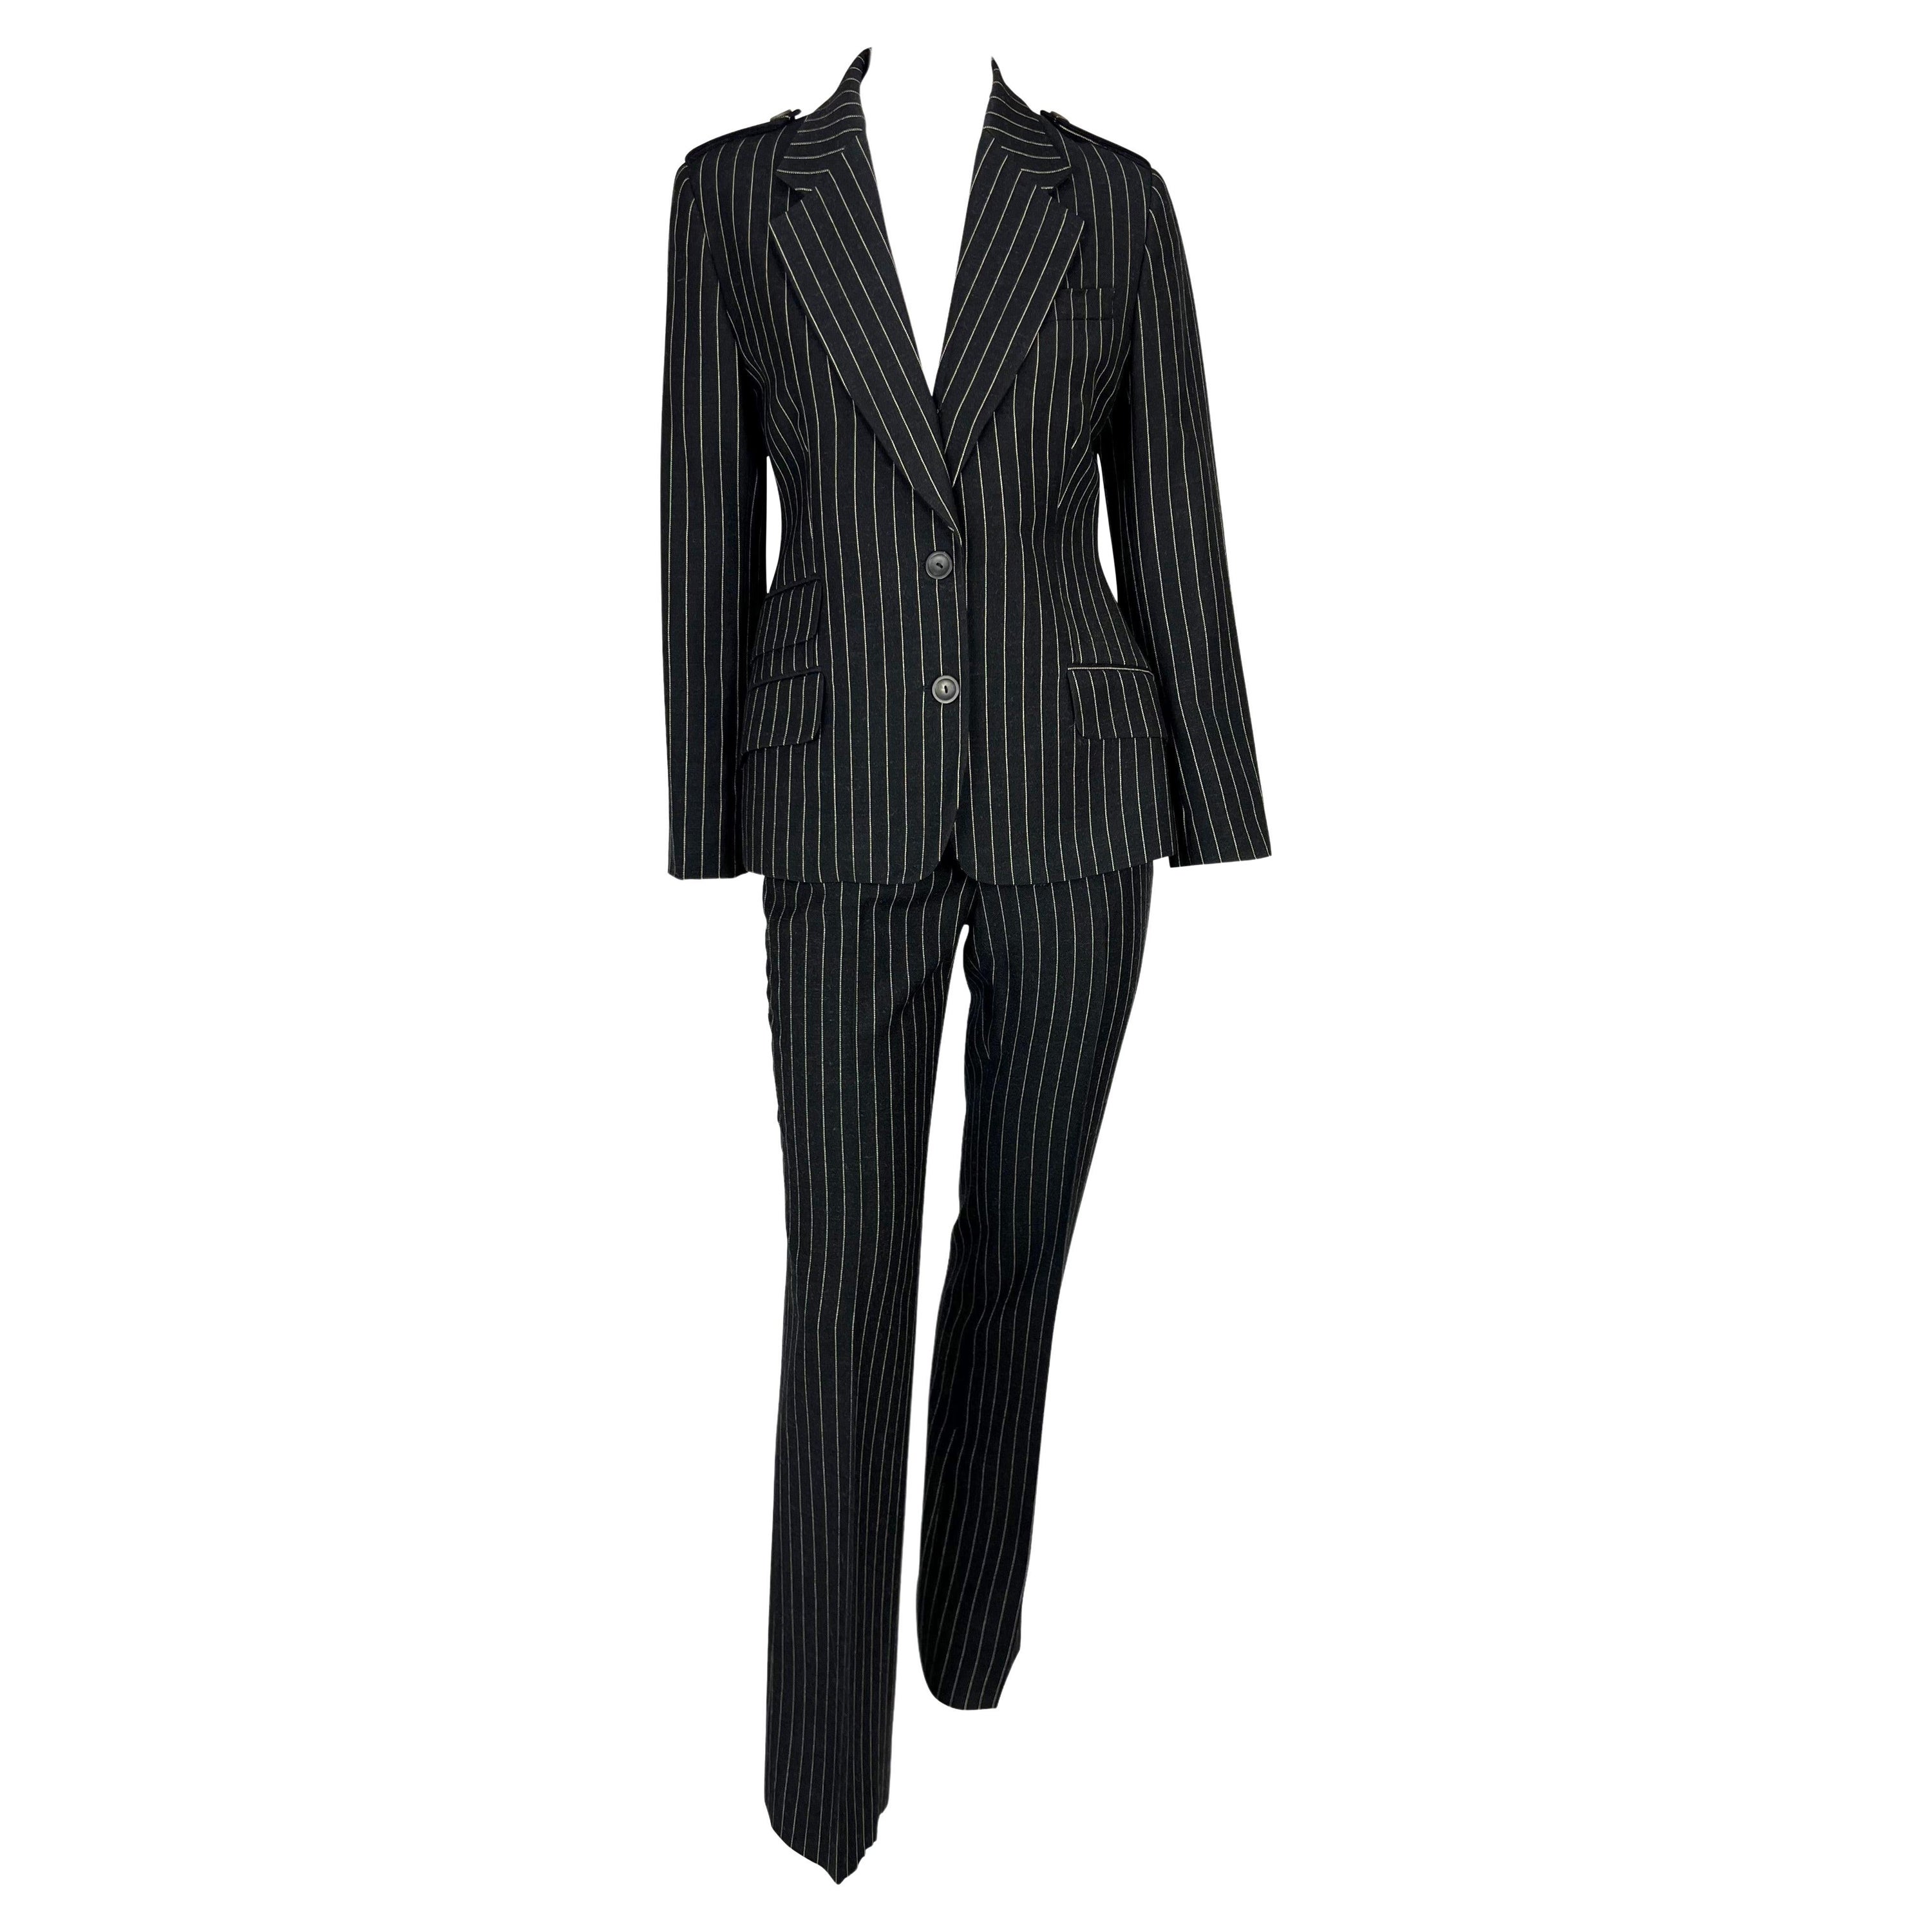 F/W 1996 Gucci by Tom Ford Runway Ad Black Wool Pinstripe Epaulet Pant Suit For Sale